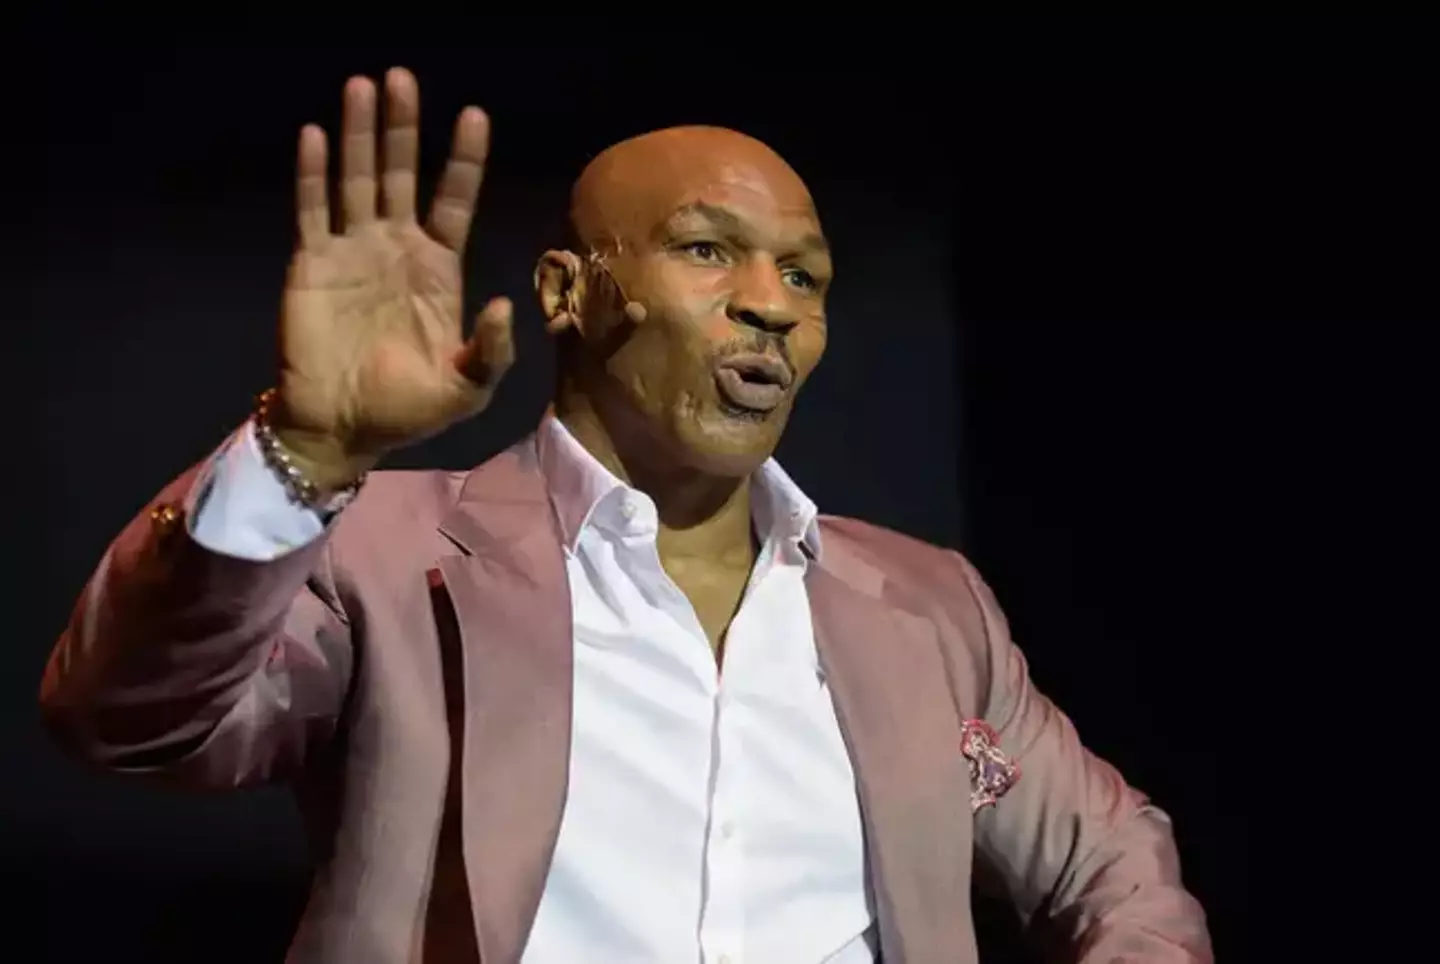 Mike Tyson's representatives have spoken about the now viral plane footage.